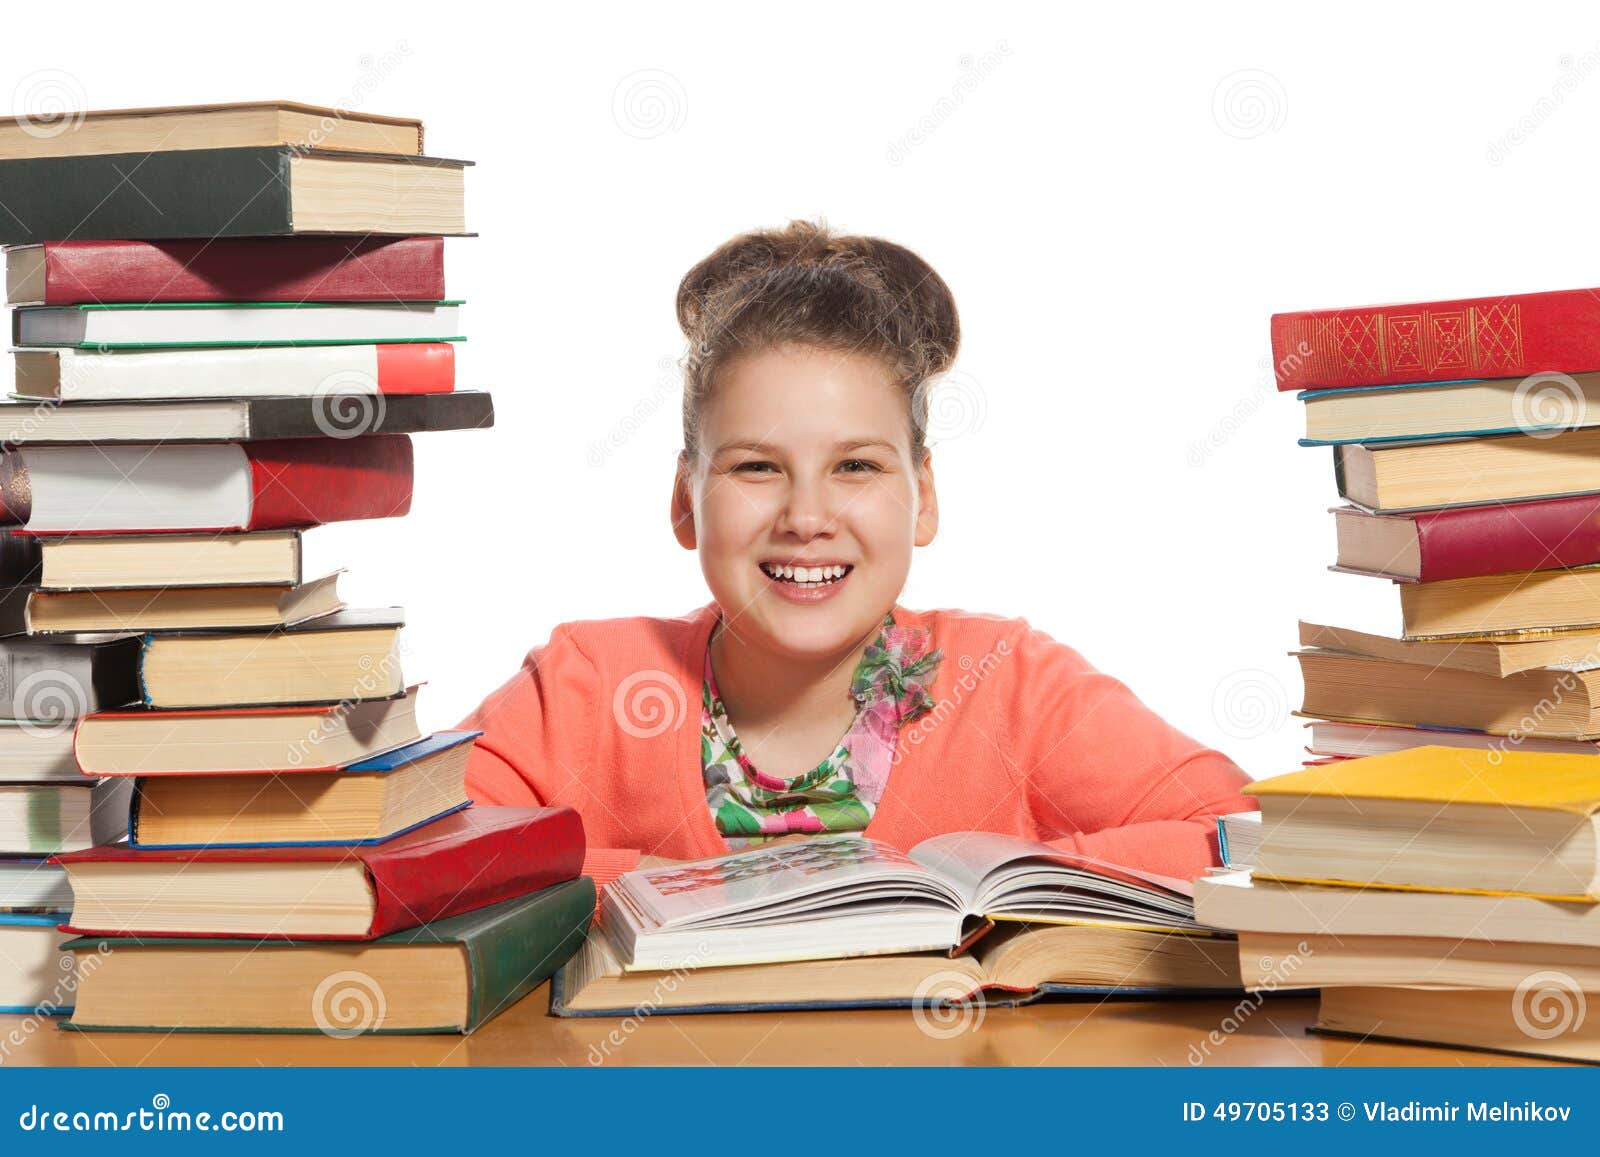 School girl with books stock image. Image of book, inquisitiveness - 497051331300 x 957